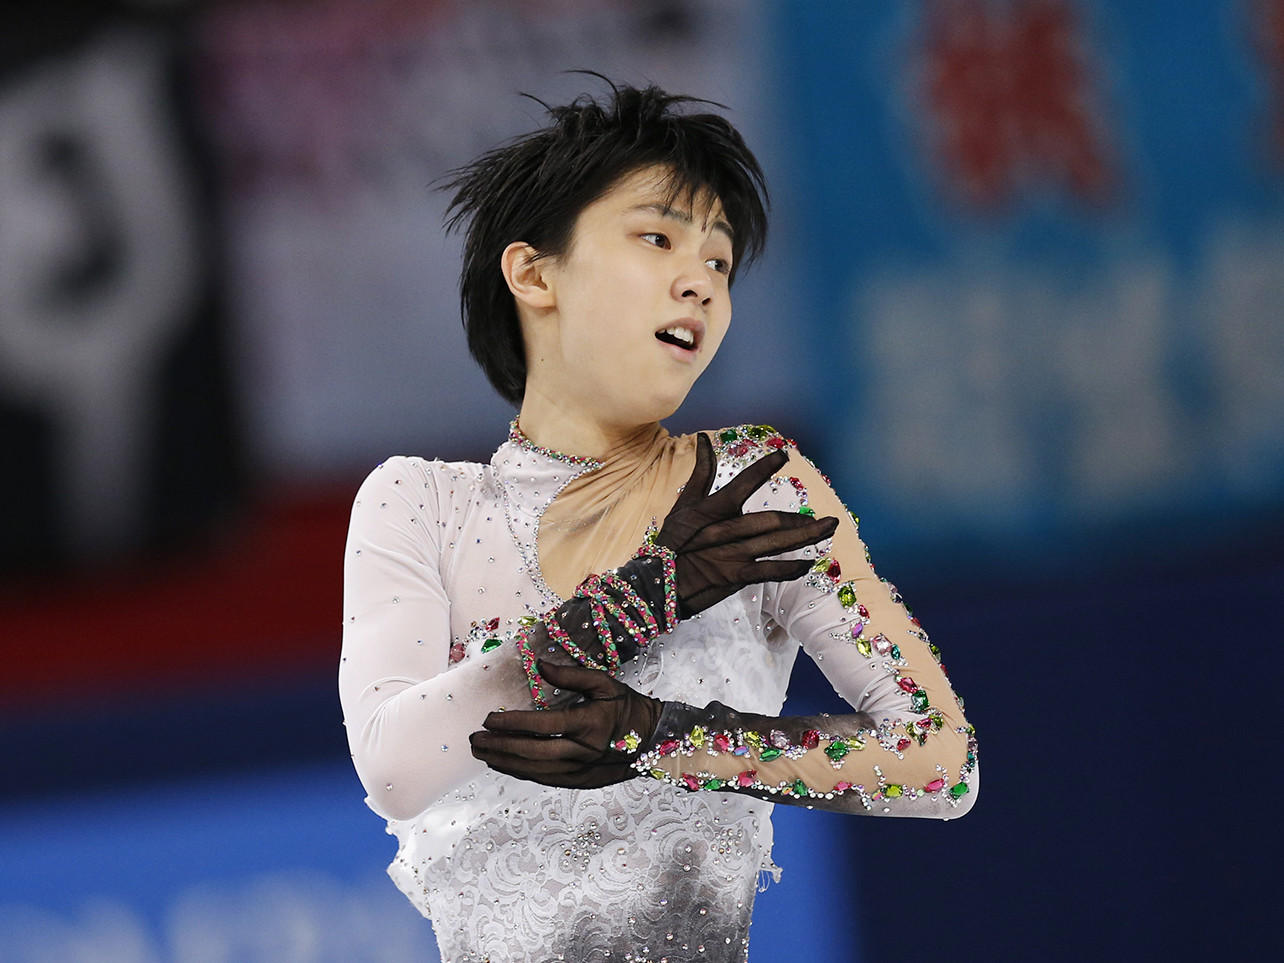 Yuzuru Hanyu rapidly improved his ability while competing with Patrick Chan.